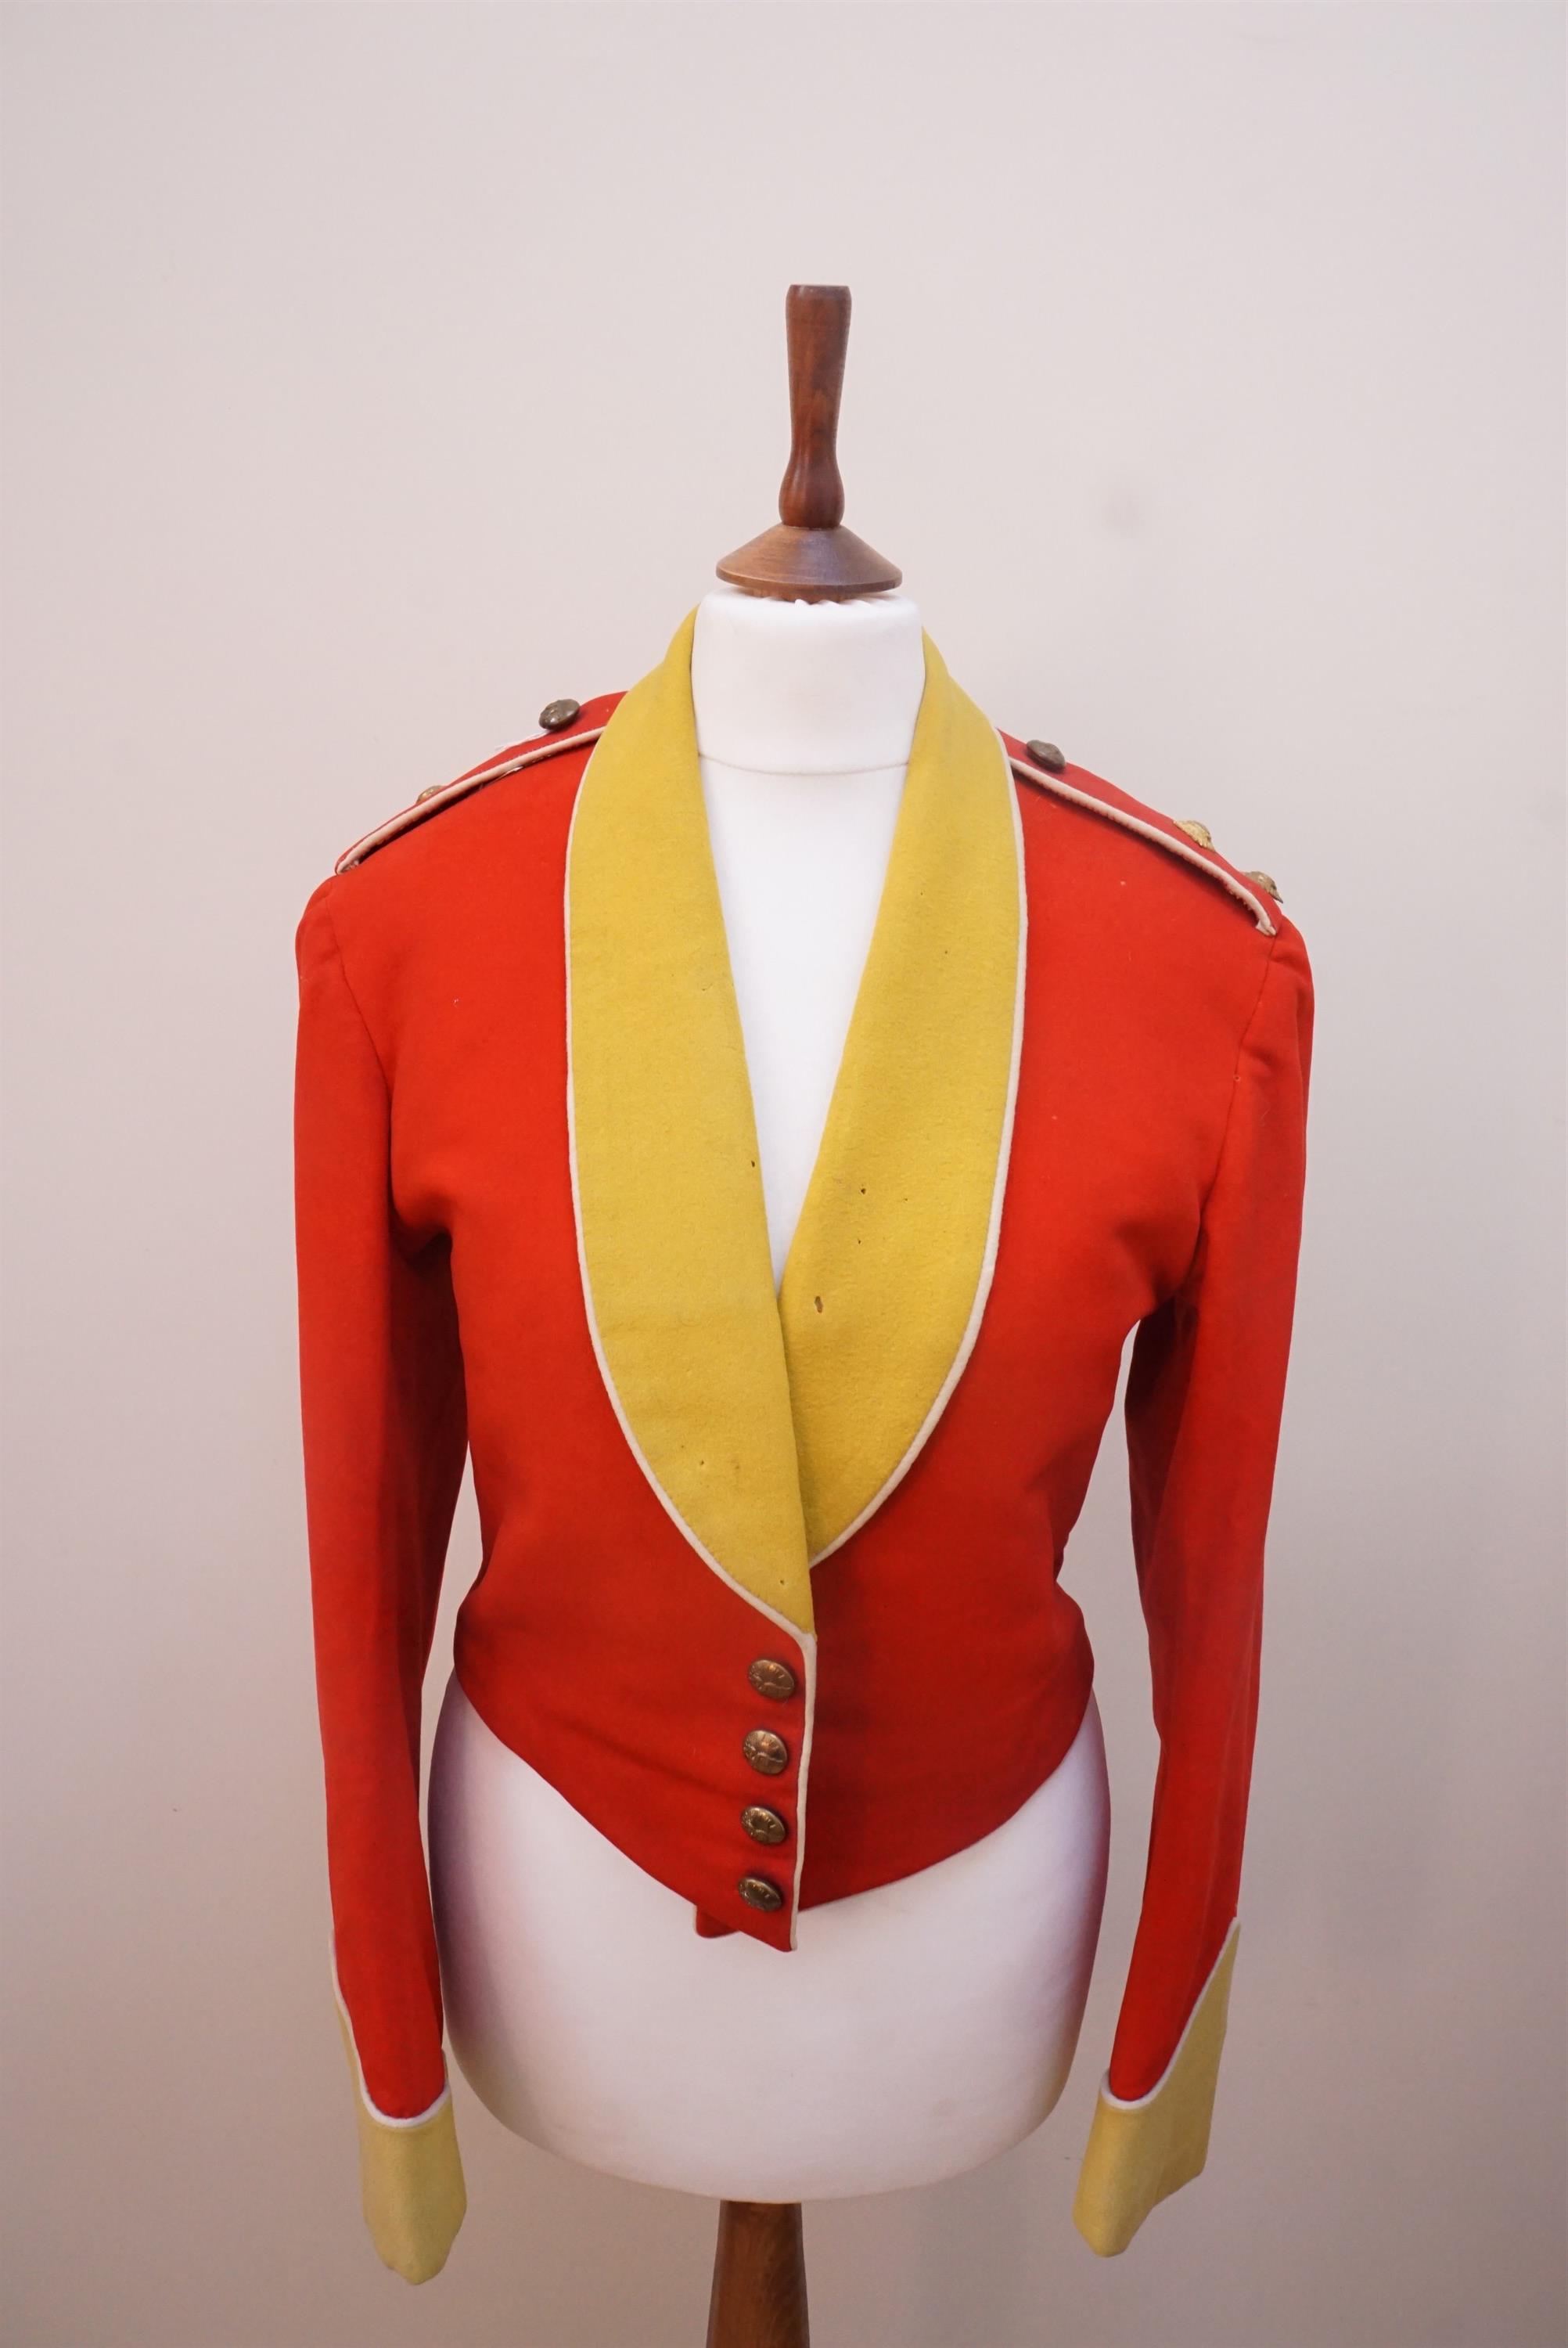 A late 19th / early 20th Century Border Regiment officer's mess dress jacket and vest, together with